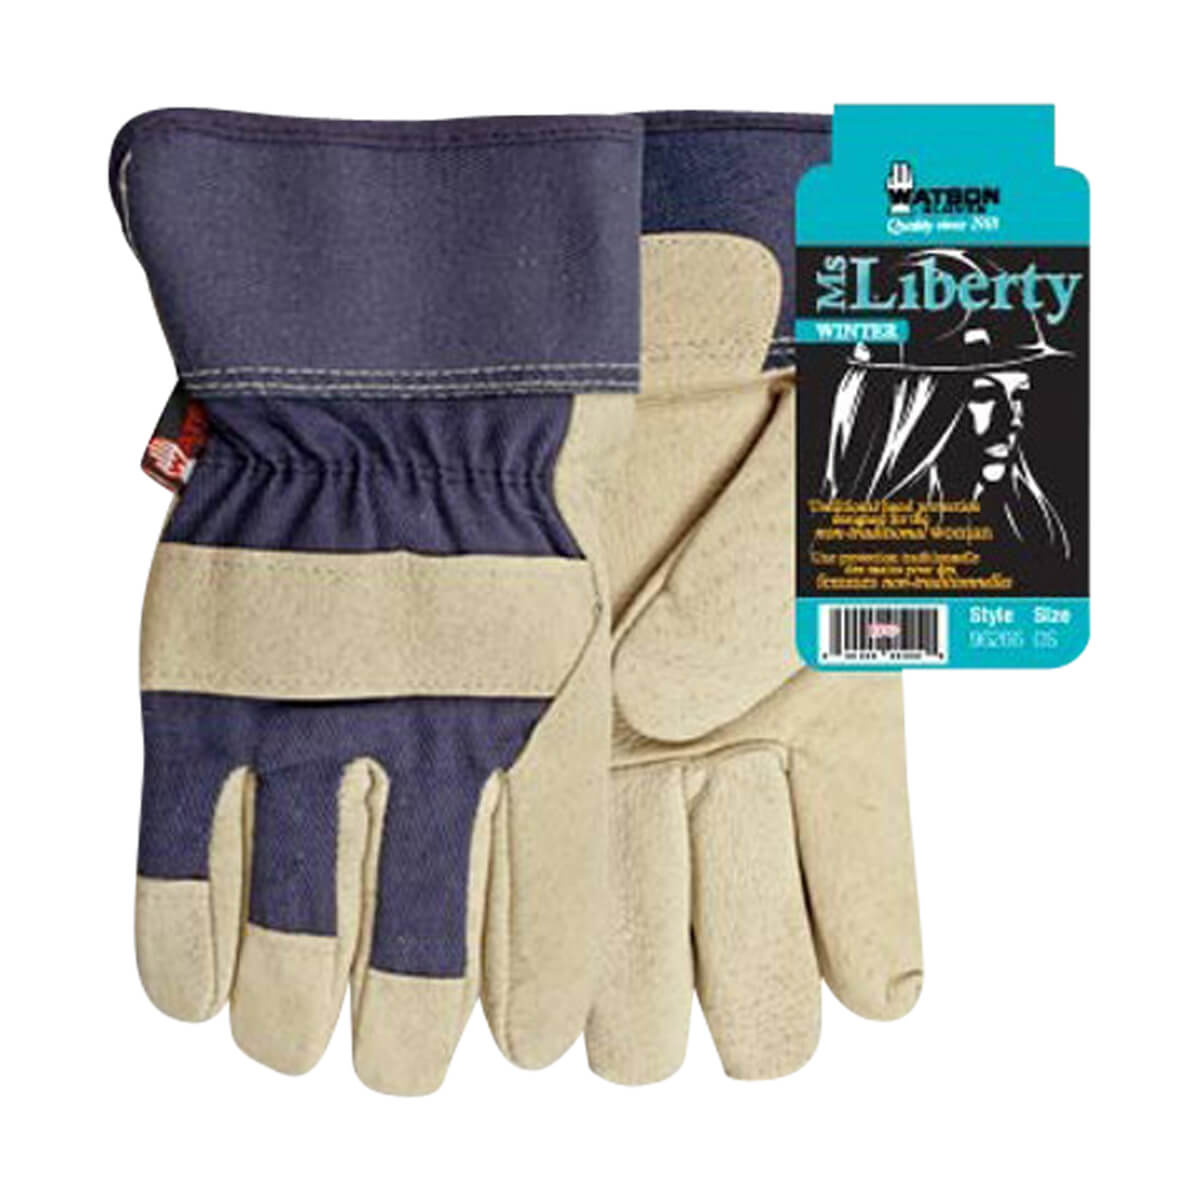 Lined Ms Liberty Gloves